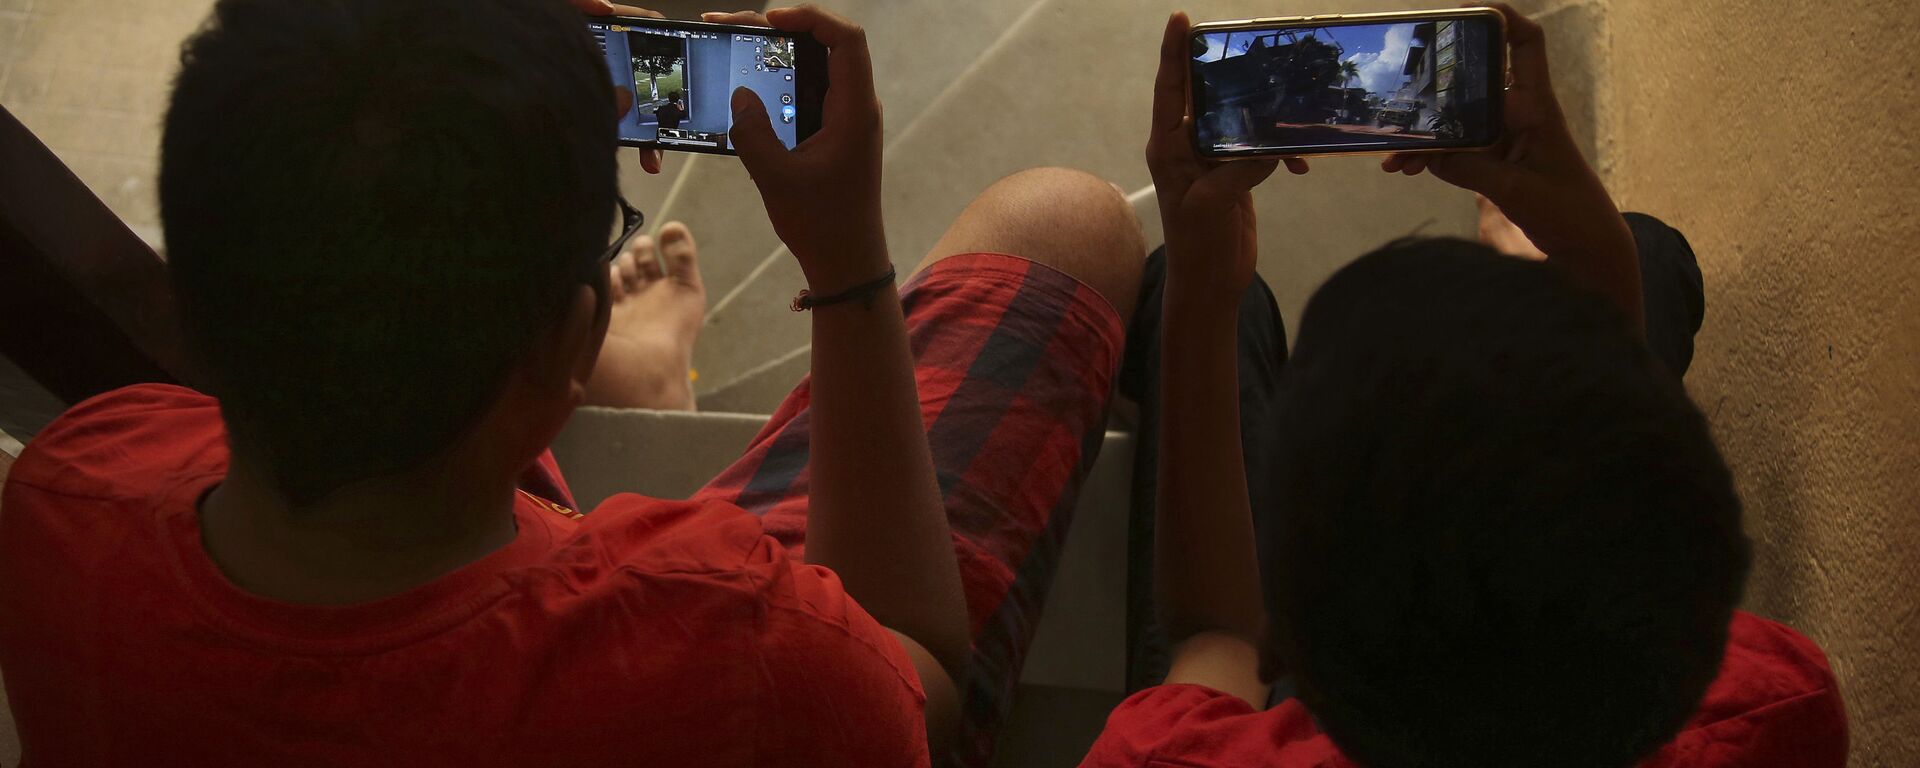 Indian children play online game PUBG on their mobile phones sitting on stairs outside their house  in Hyderabad, India, Friday, April 5, 2019.  - Sputnik International, 1920, 08.09.2020